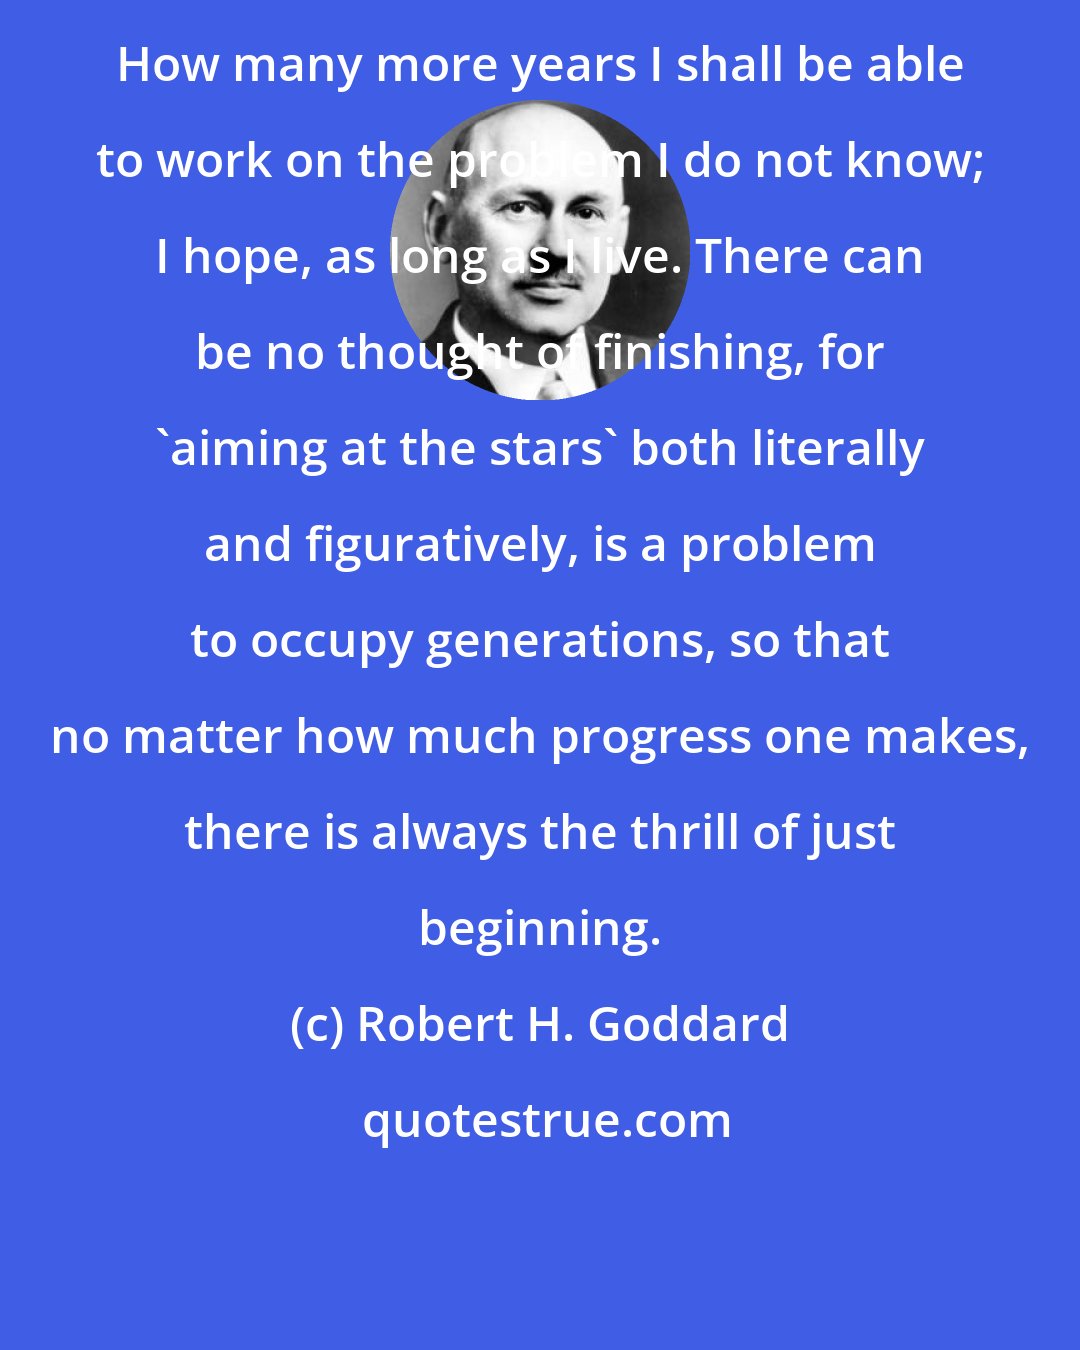 Robert H. Goddard: How many more years I shall be able to work on the problem I do not know; I hope, as long as I live. There can be no thought of finishing, for 'aiming at the stars' both literally and figuratively, is a problem to occupy generations, so that no matter how much progress one makes, there is always the thrill of just beginning.